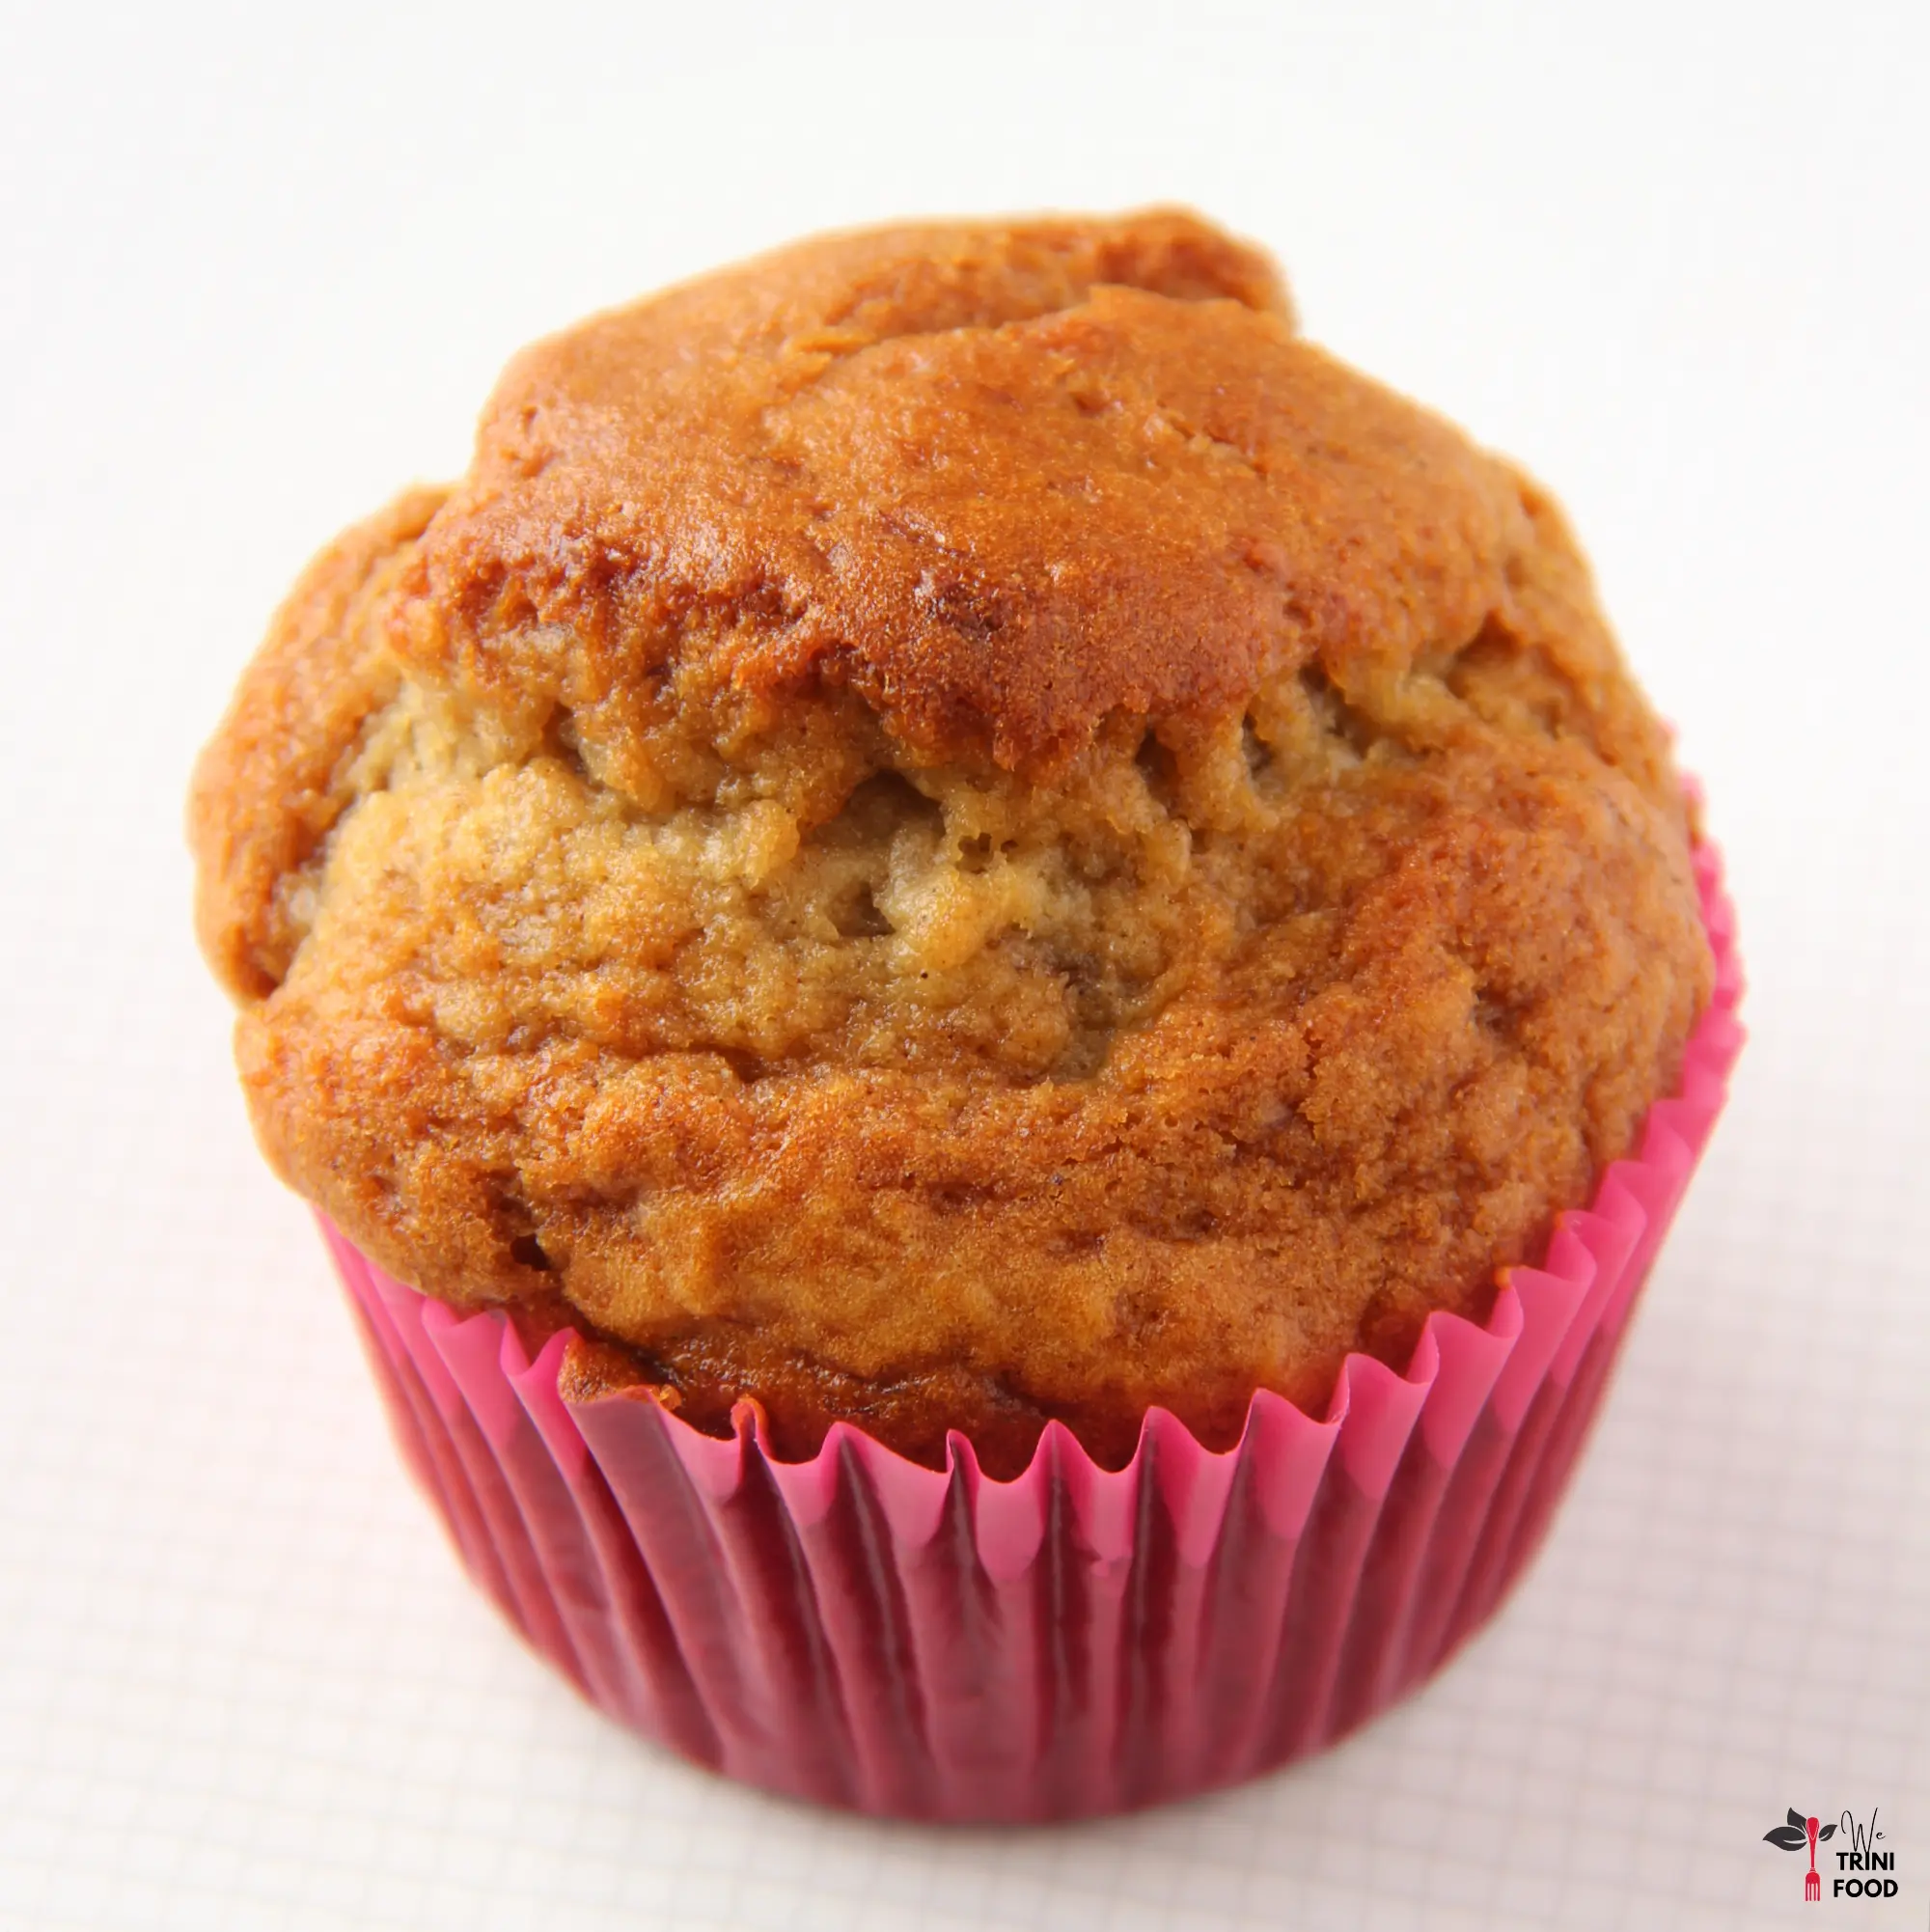 baked banana bread muffin in a pink cupcake wrapper on a white background